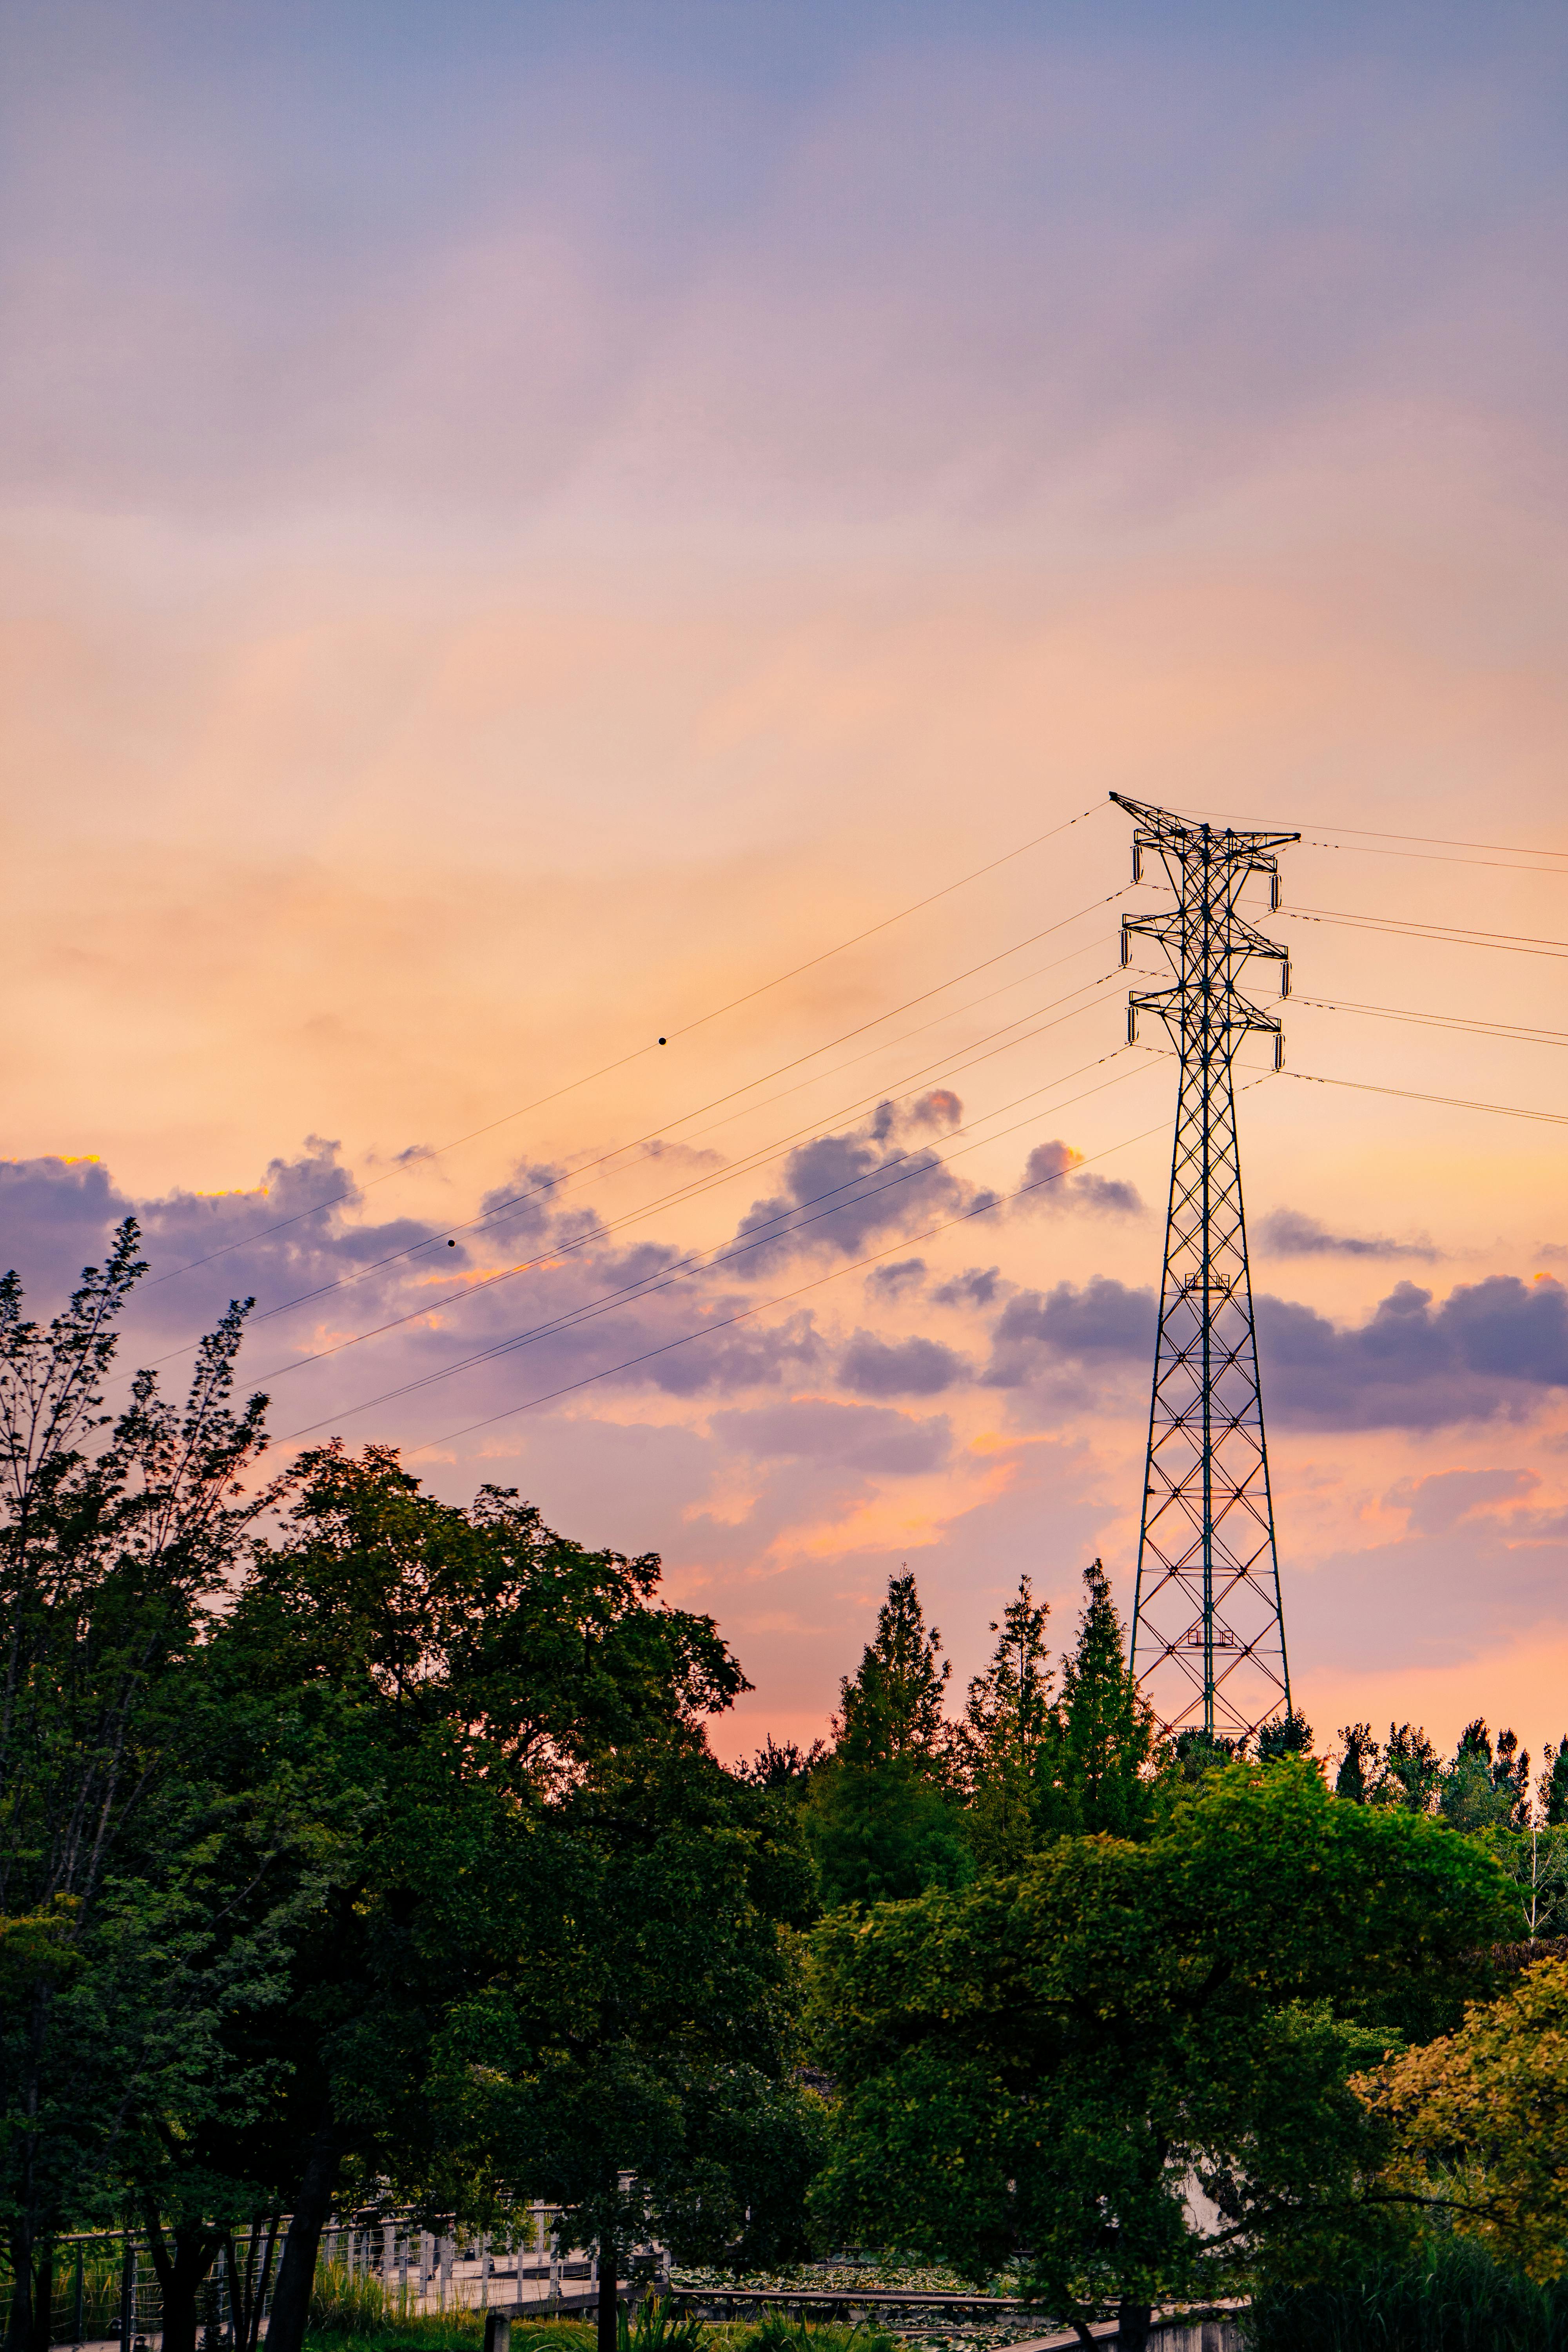 Landscape Photography of Trees Near Electricity Tower ...